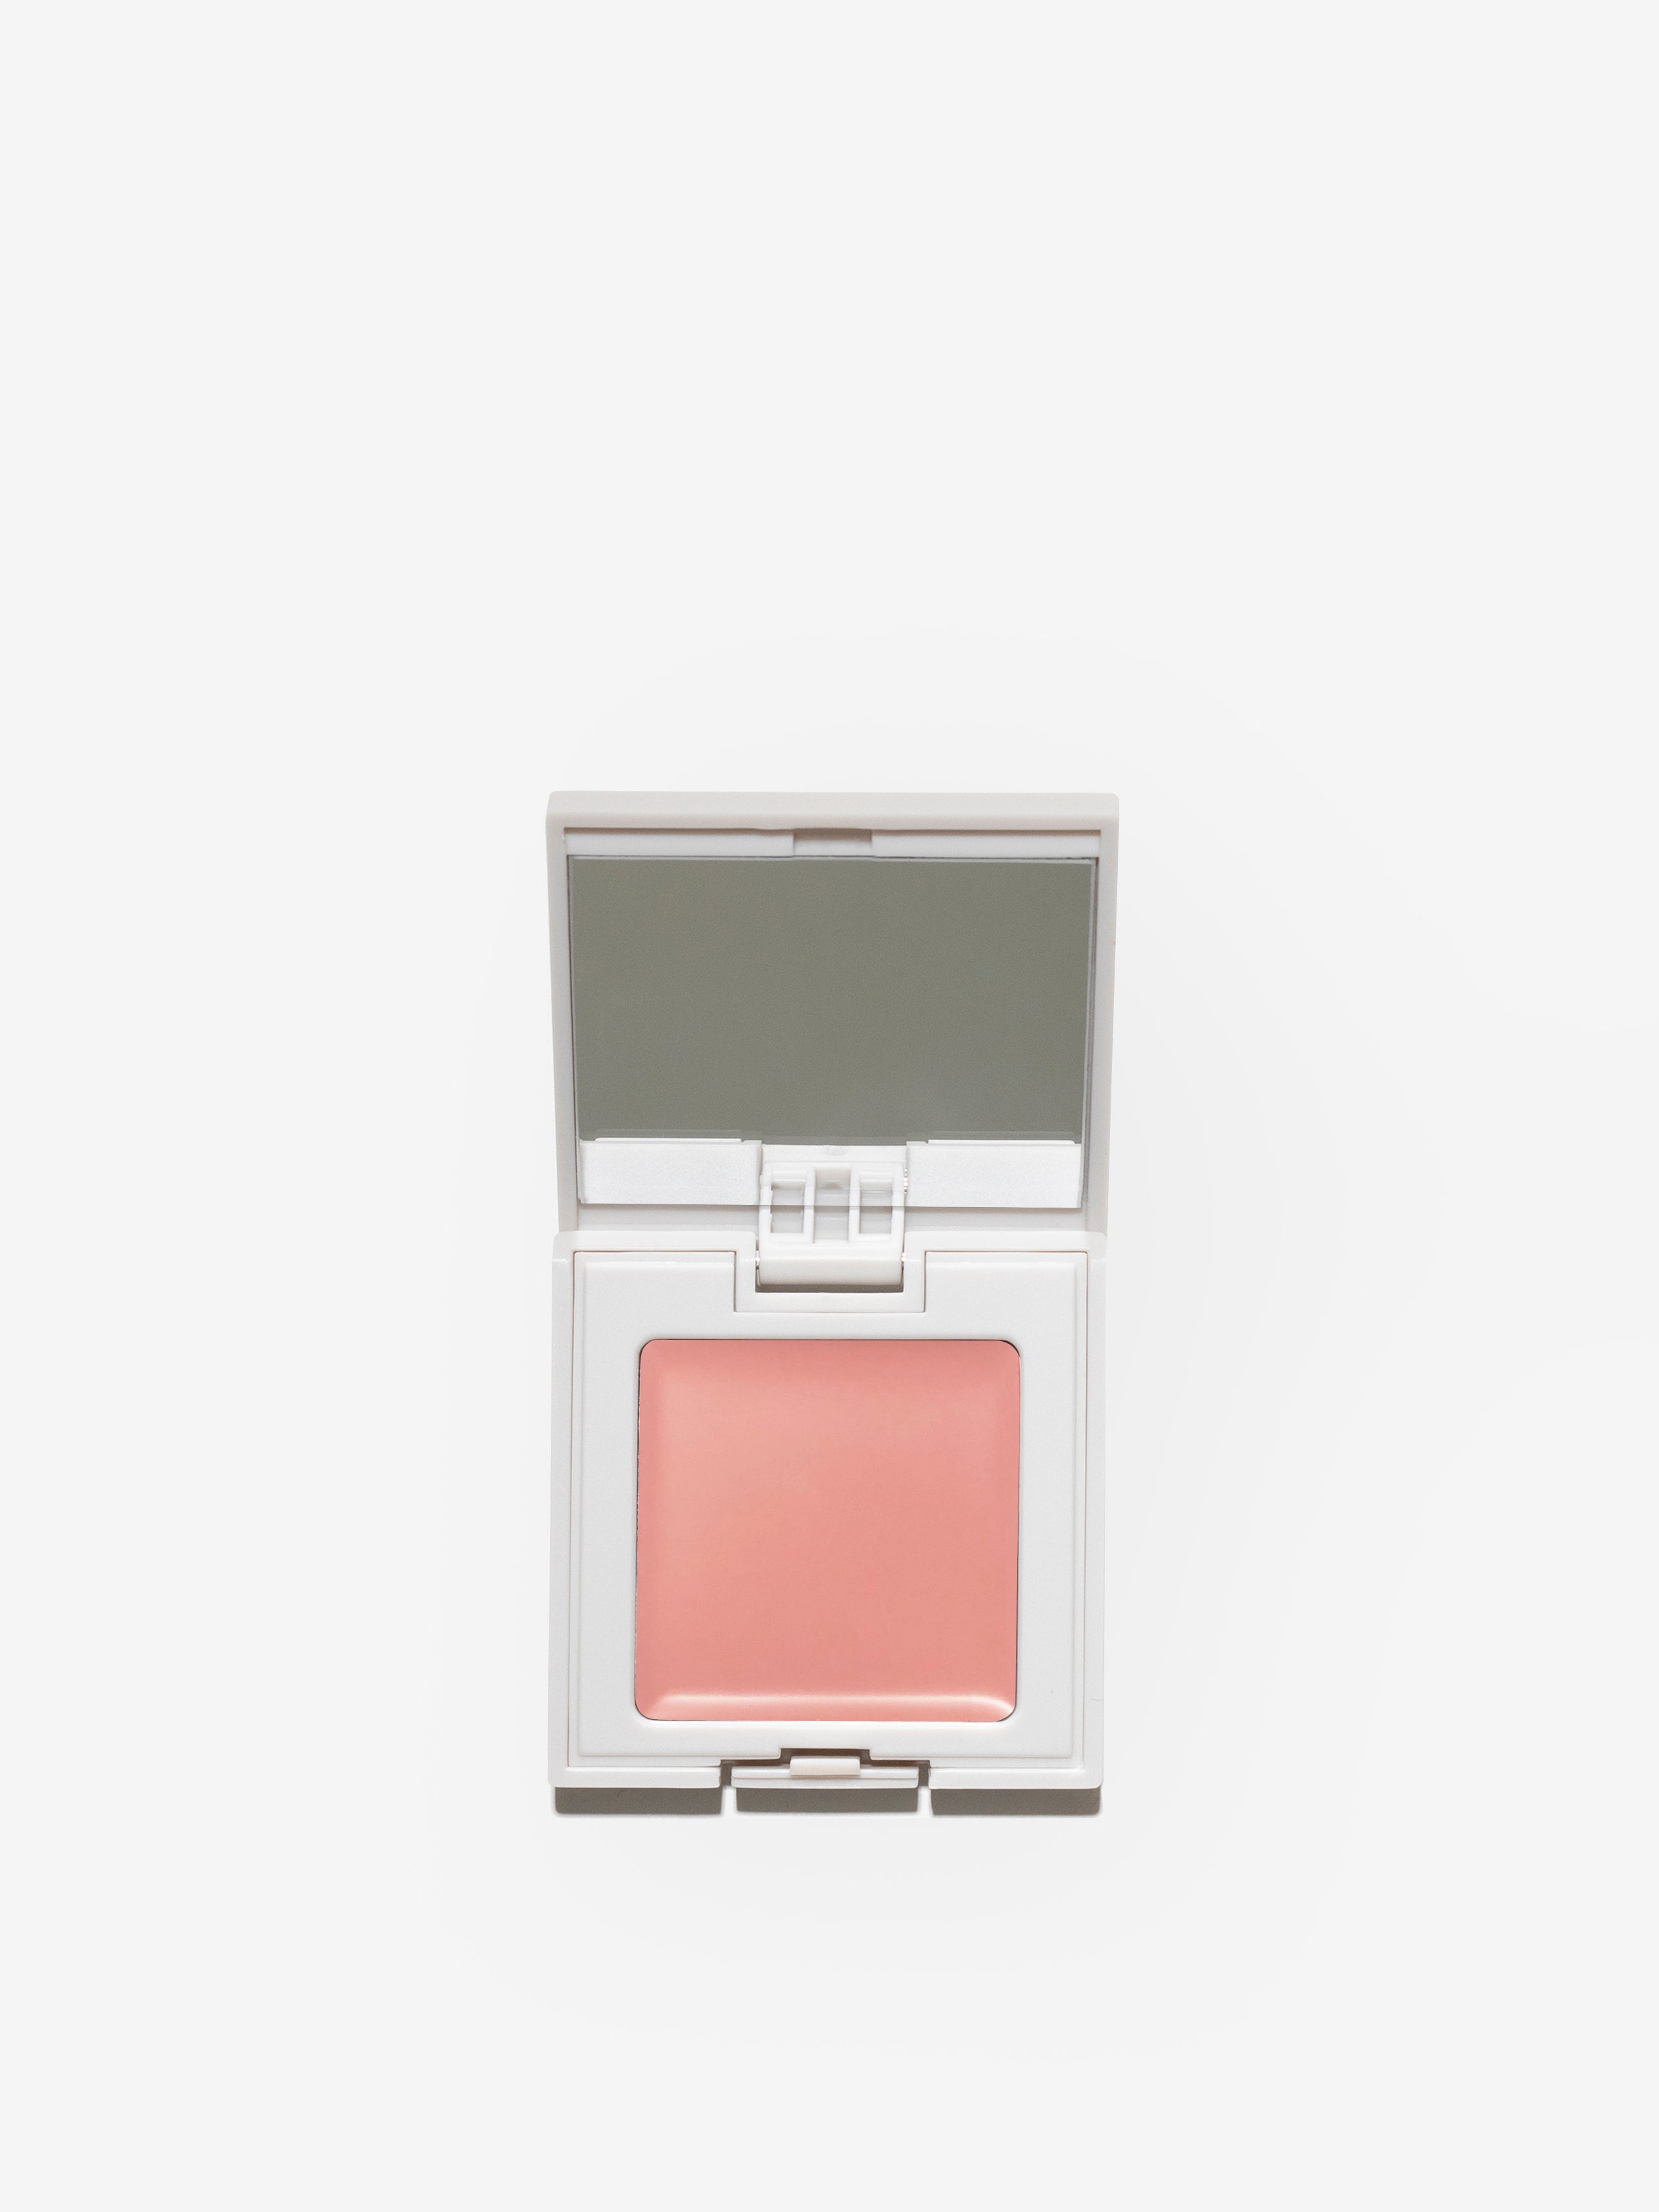 FRONT IMAGE OF REFY CREAM BLUSH IN SHADE ROSE